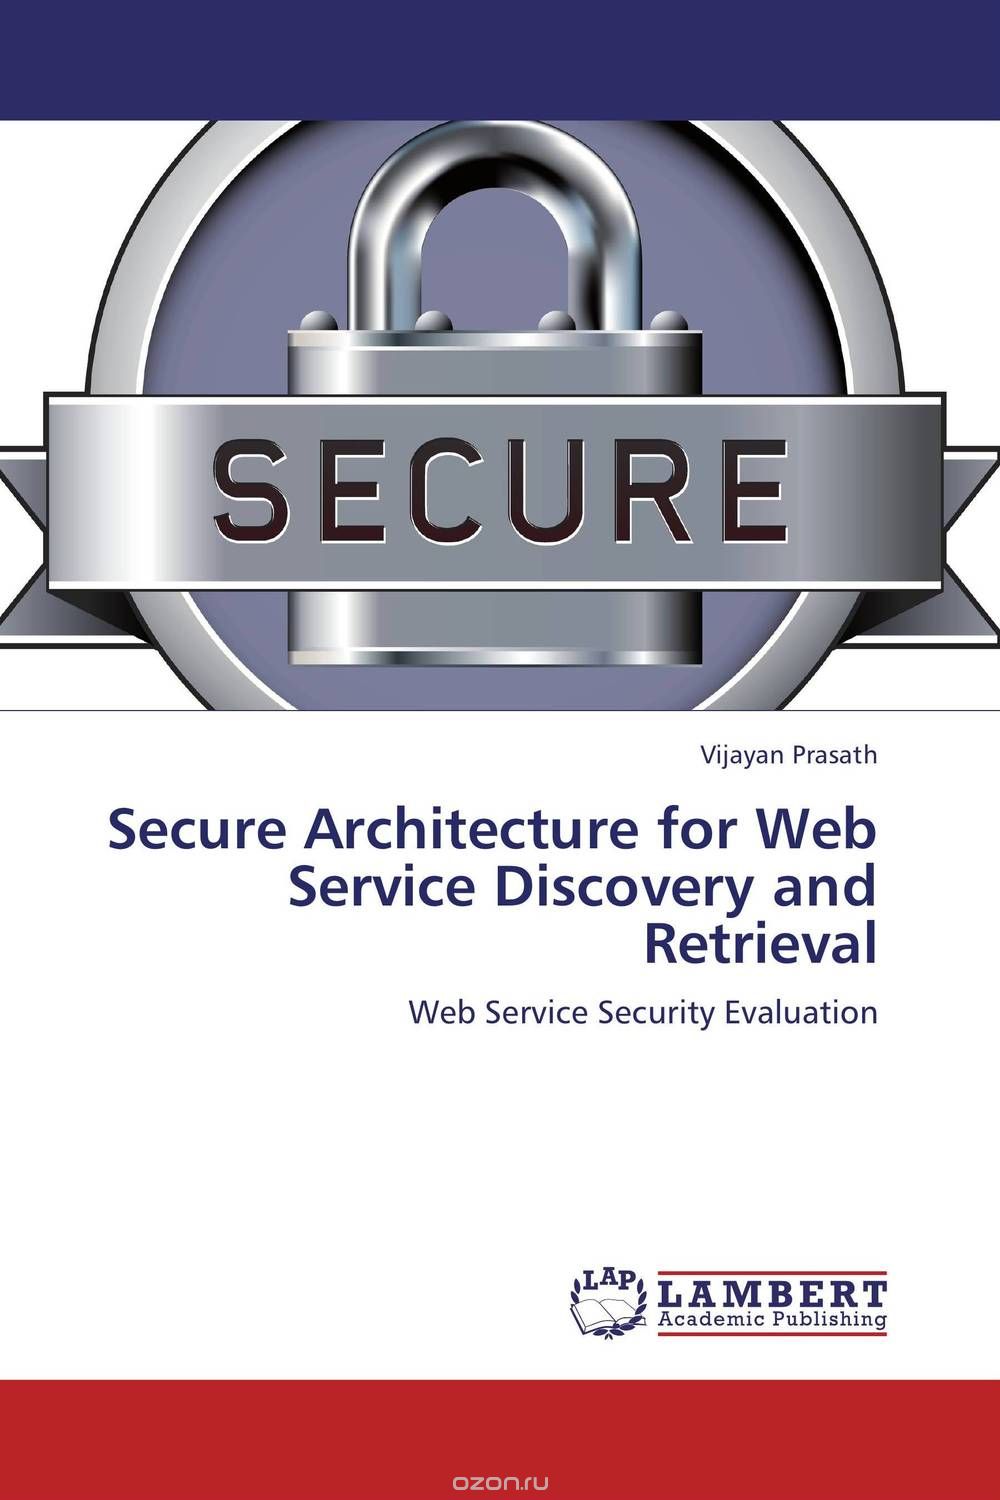 Secure Architecture for Web Service Discovery and Retrieval